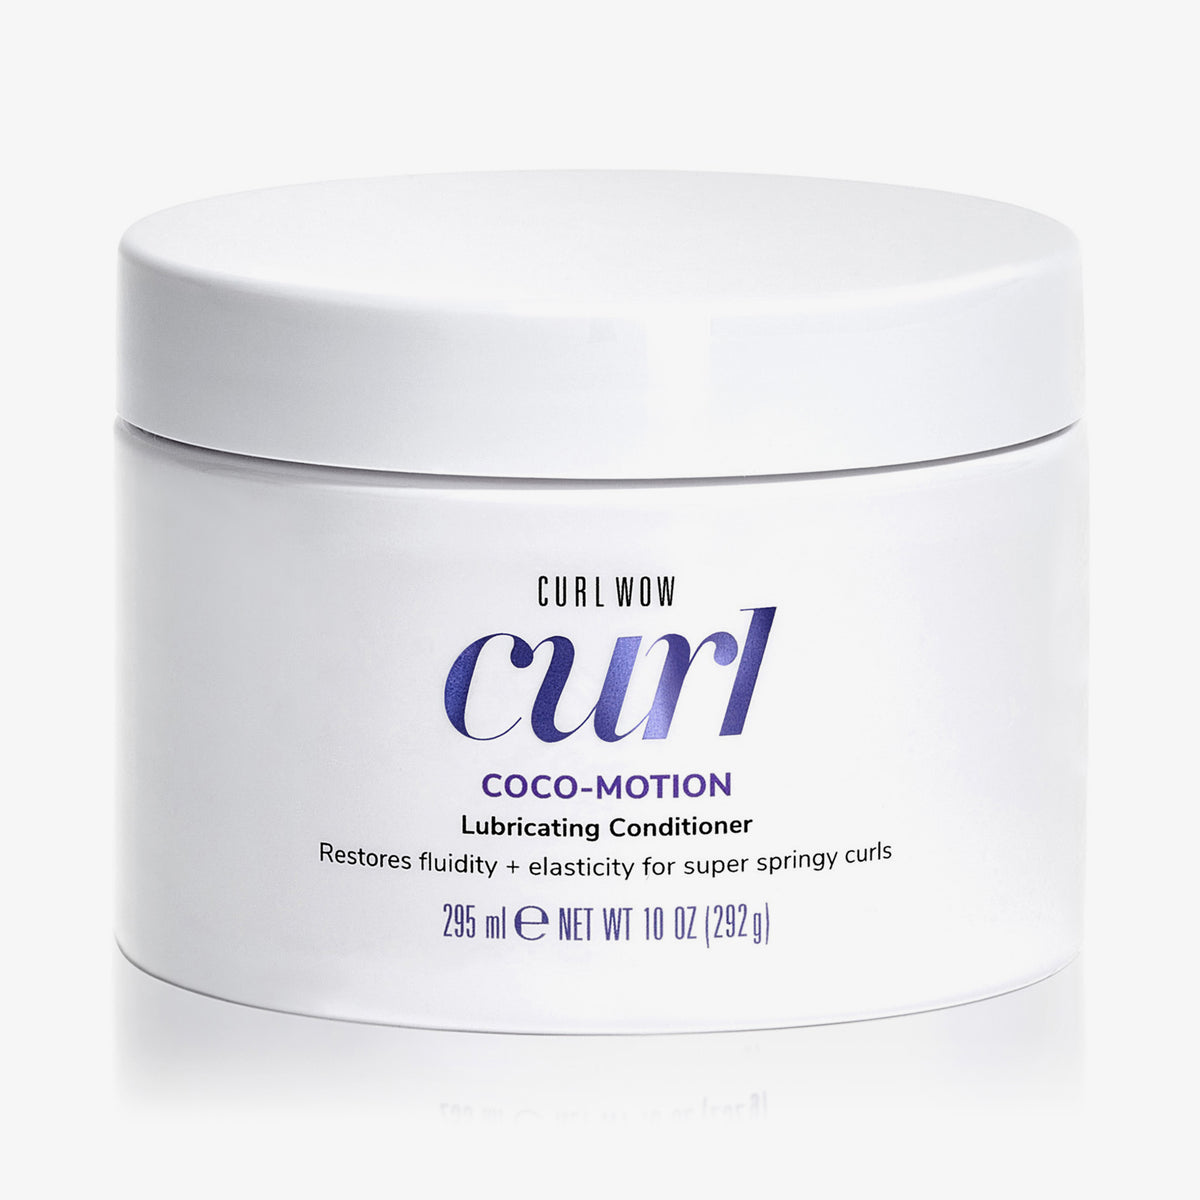 Color Wow | Curl Wow Coco Motion Lubricating Conditioner